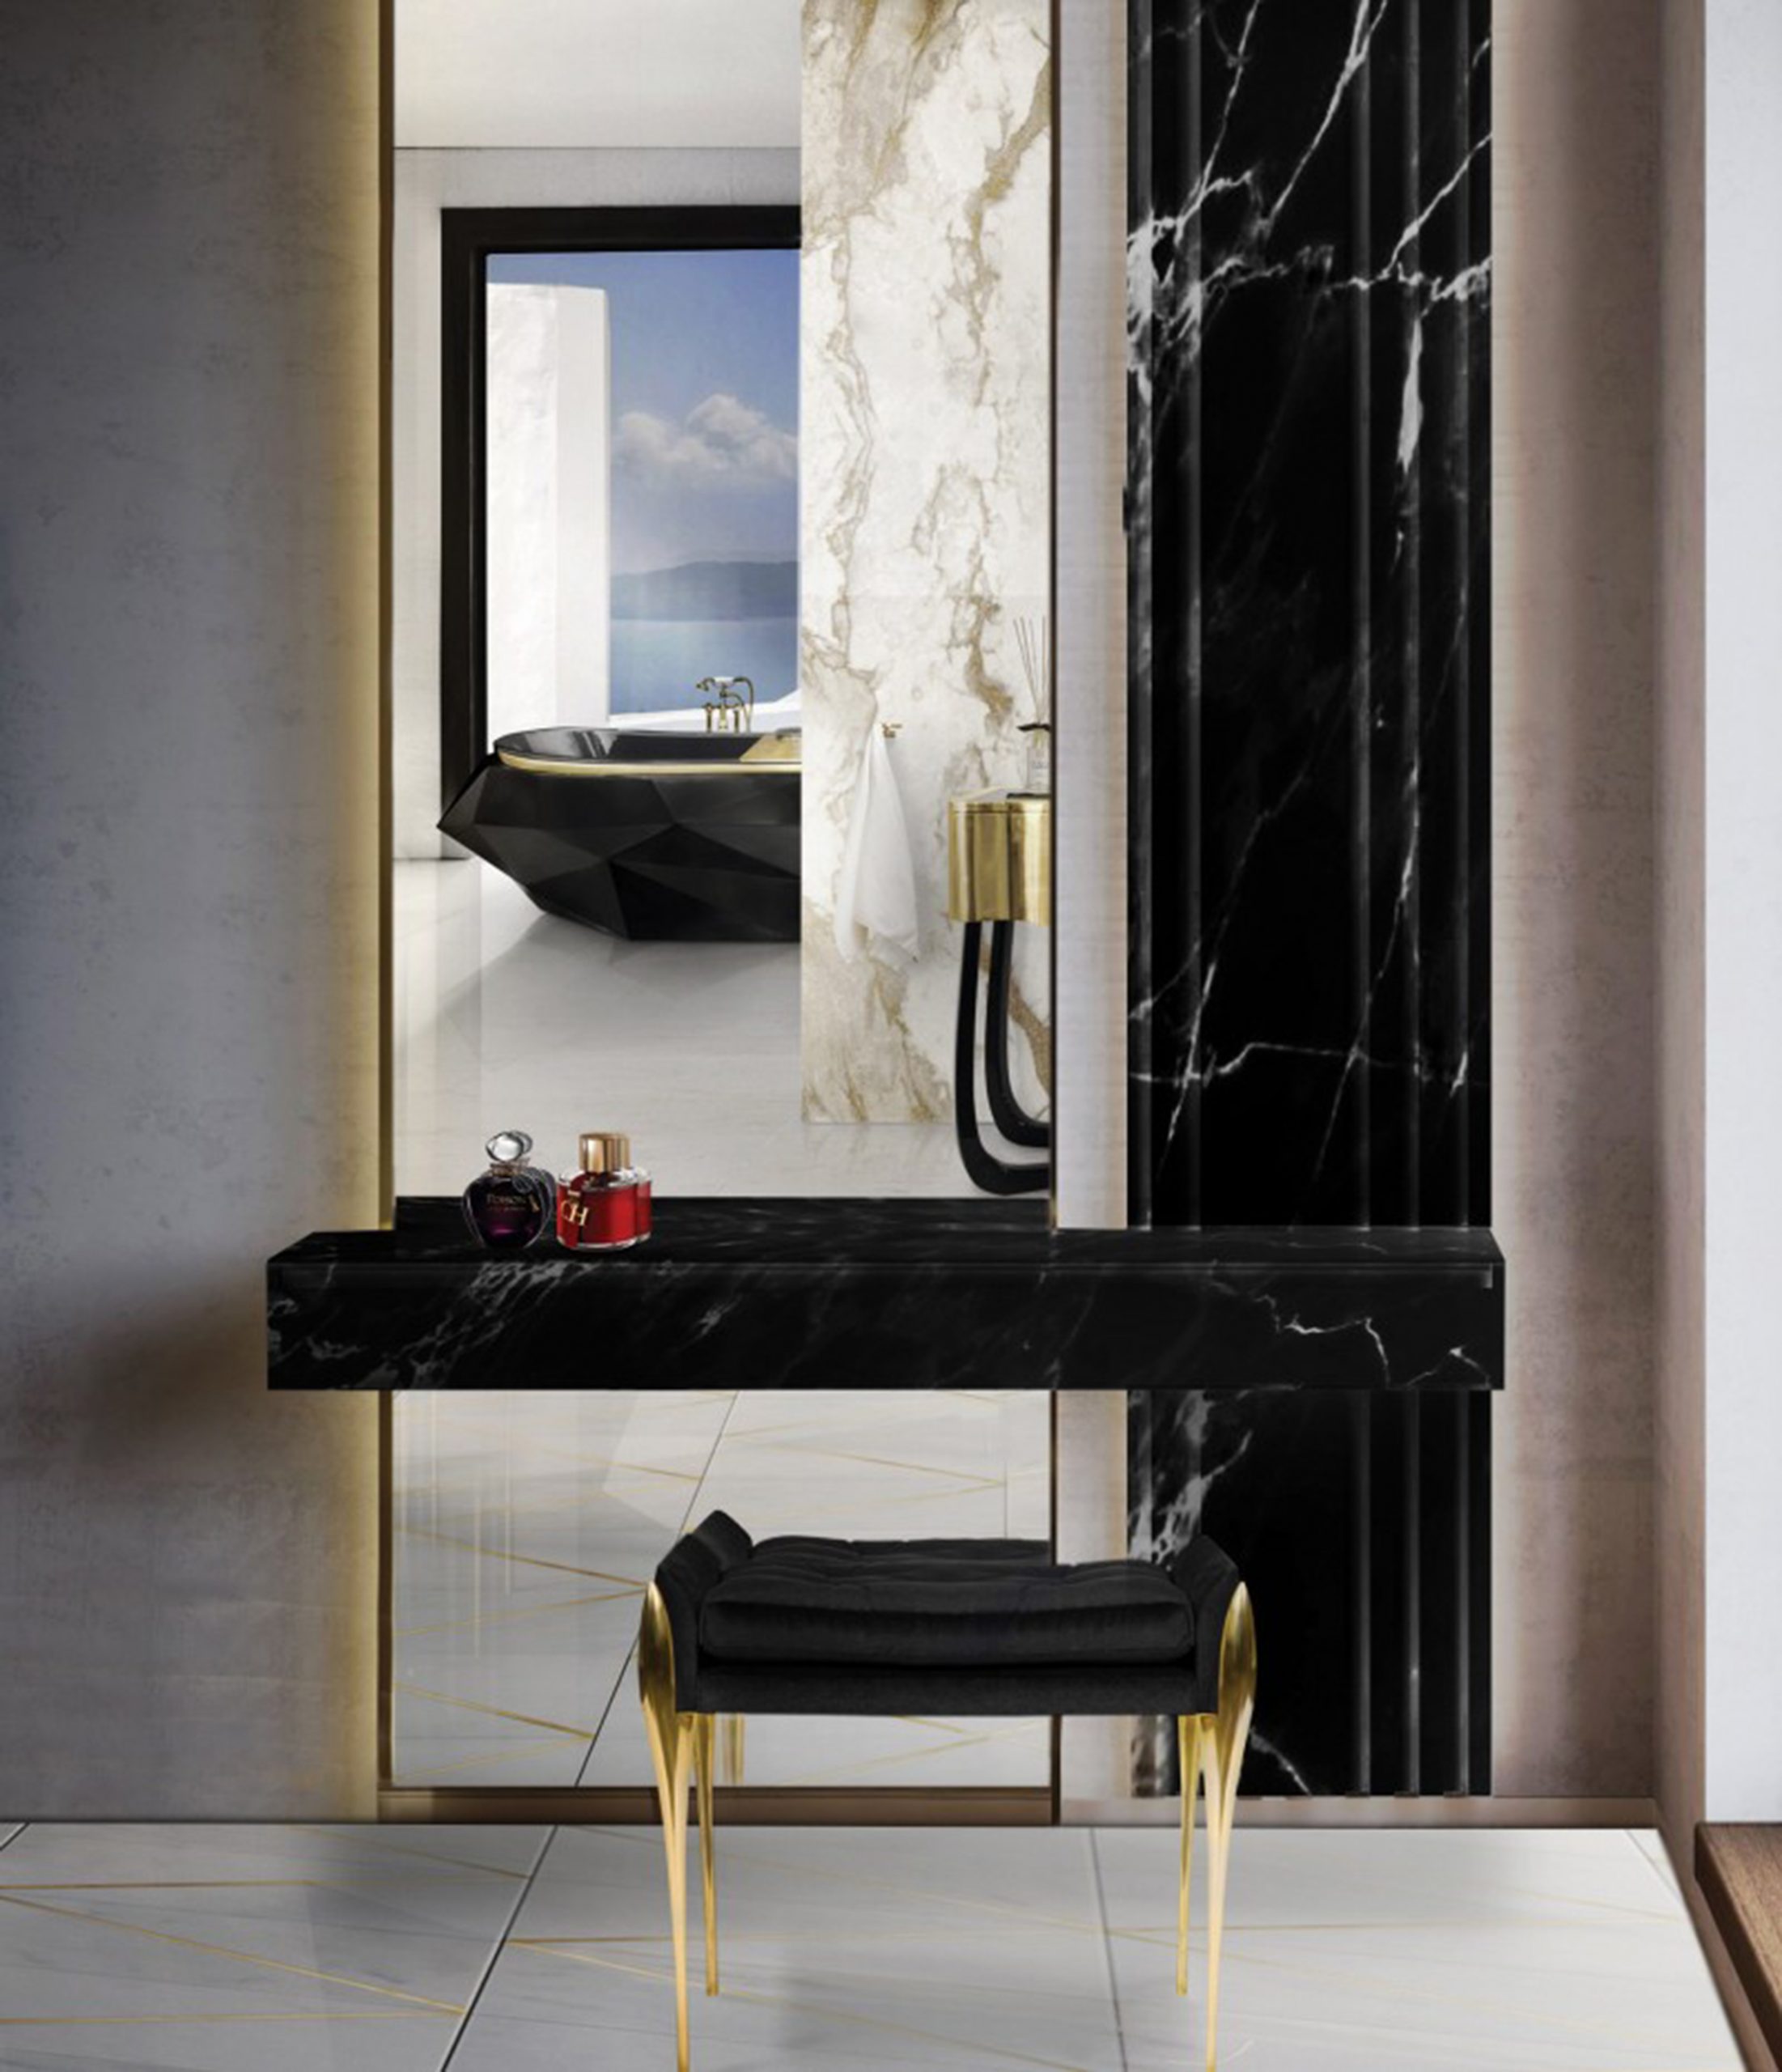 Stunning Bathroom Trends to try in 2021